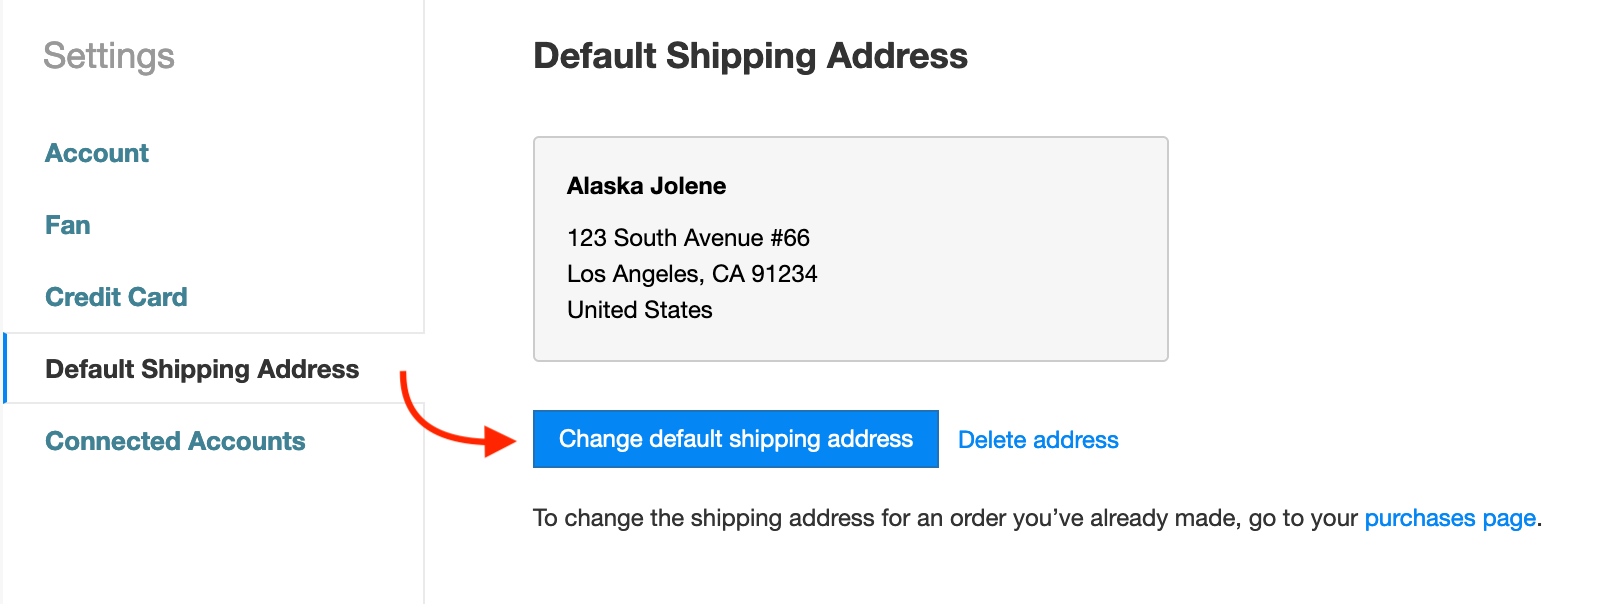 default shipping address settings page, showing button to change address